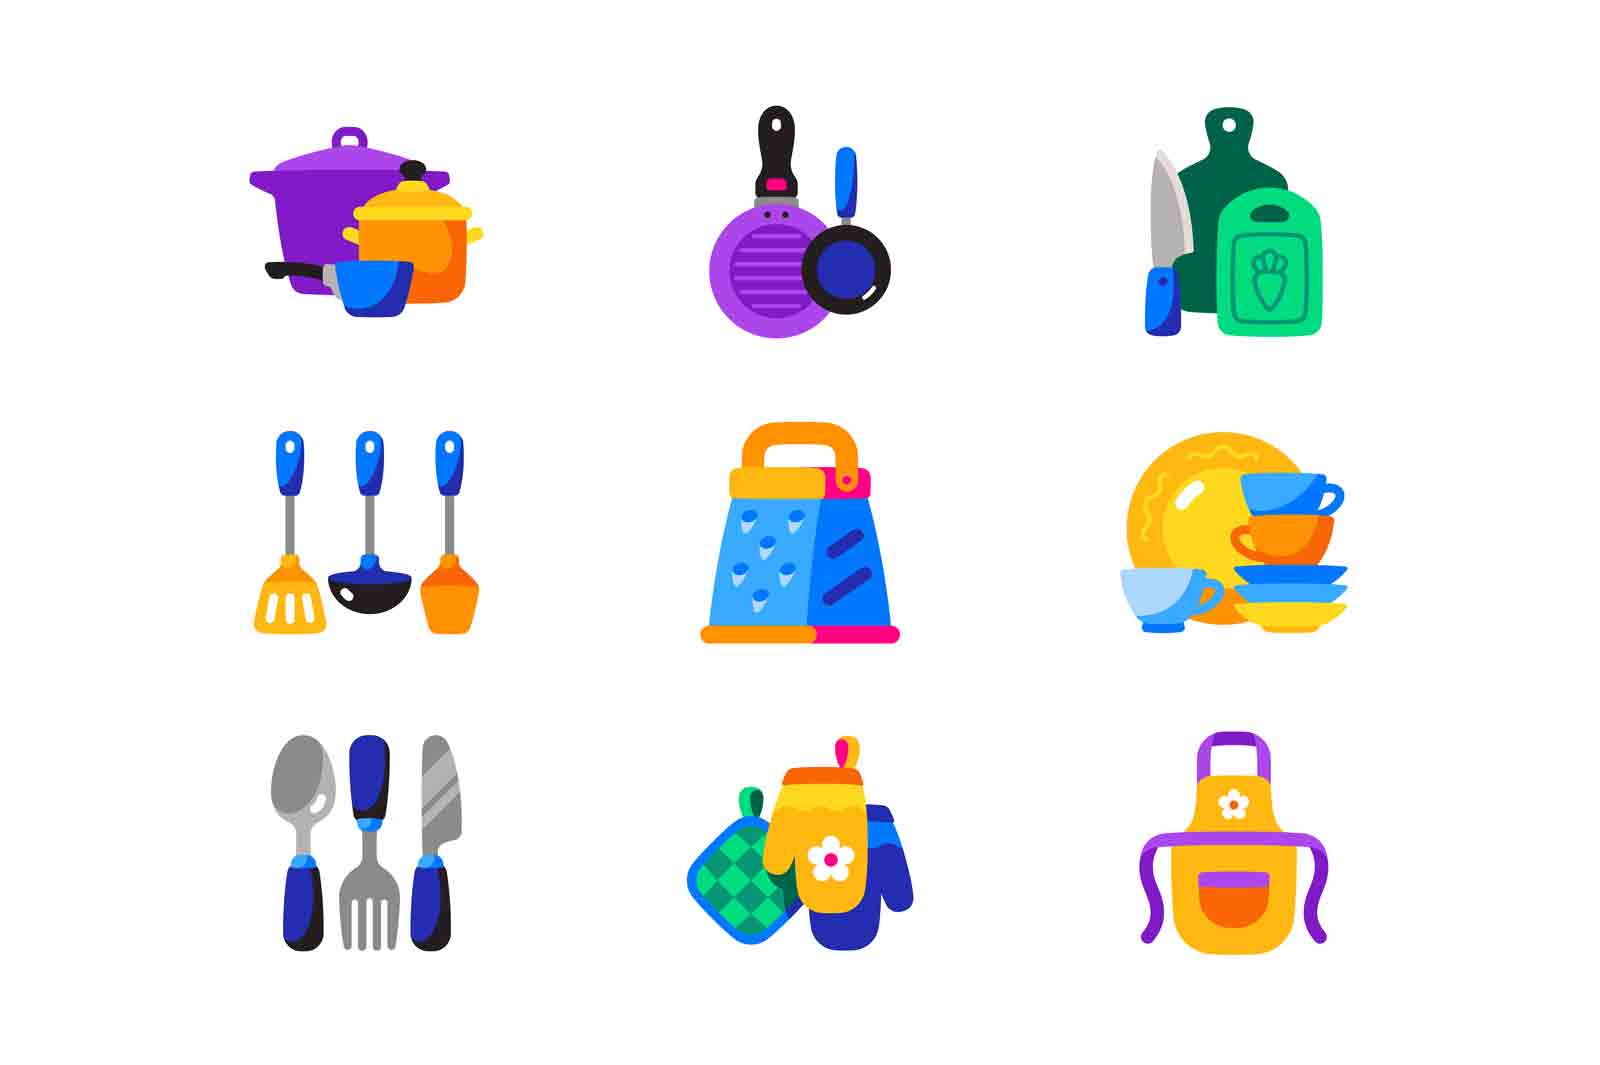 Kitchen accessories icons set vector illustration. Kitchenware tools and equipment, utensils and cutlery for cooking dishes flat style concept